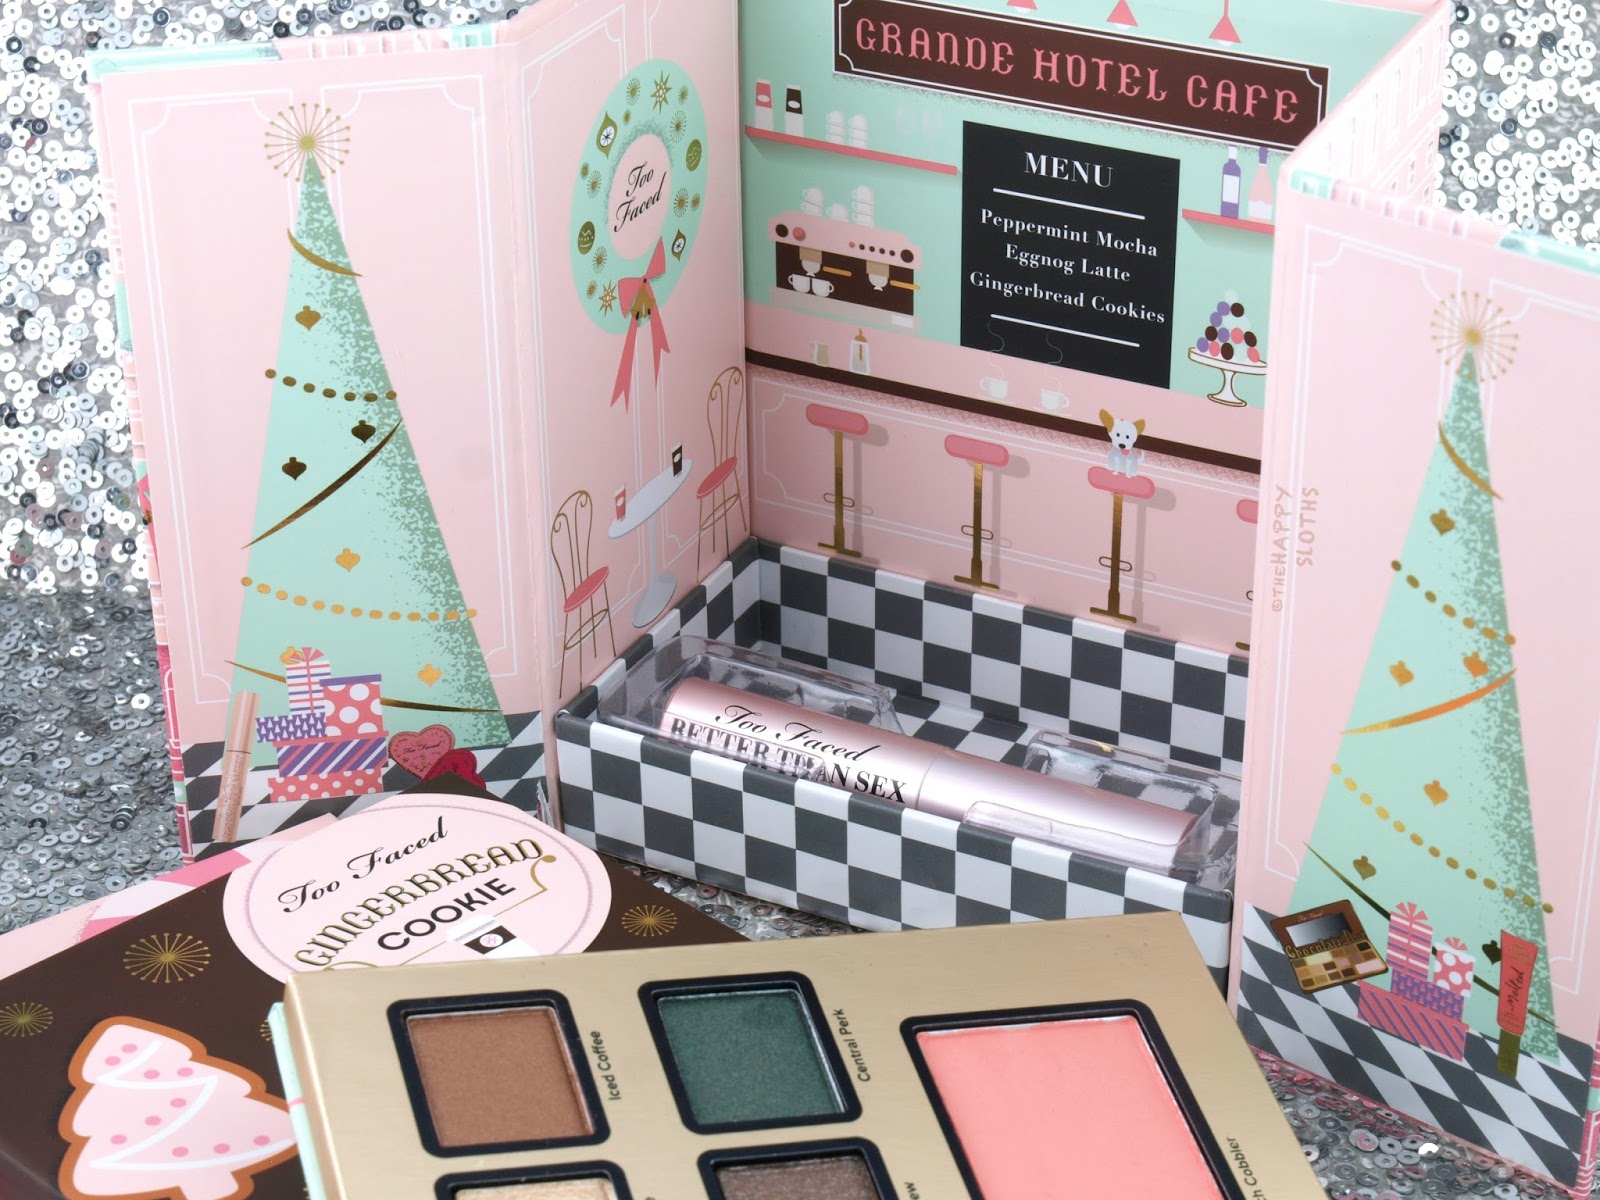 Too Faced Holiday 2016 Grande Hotel Café: Review and Swatches | The